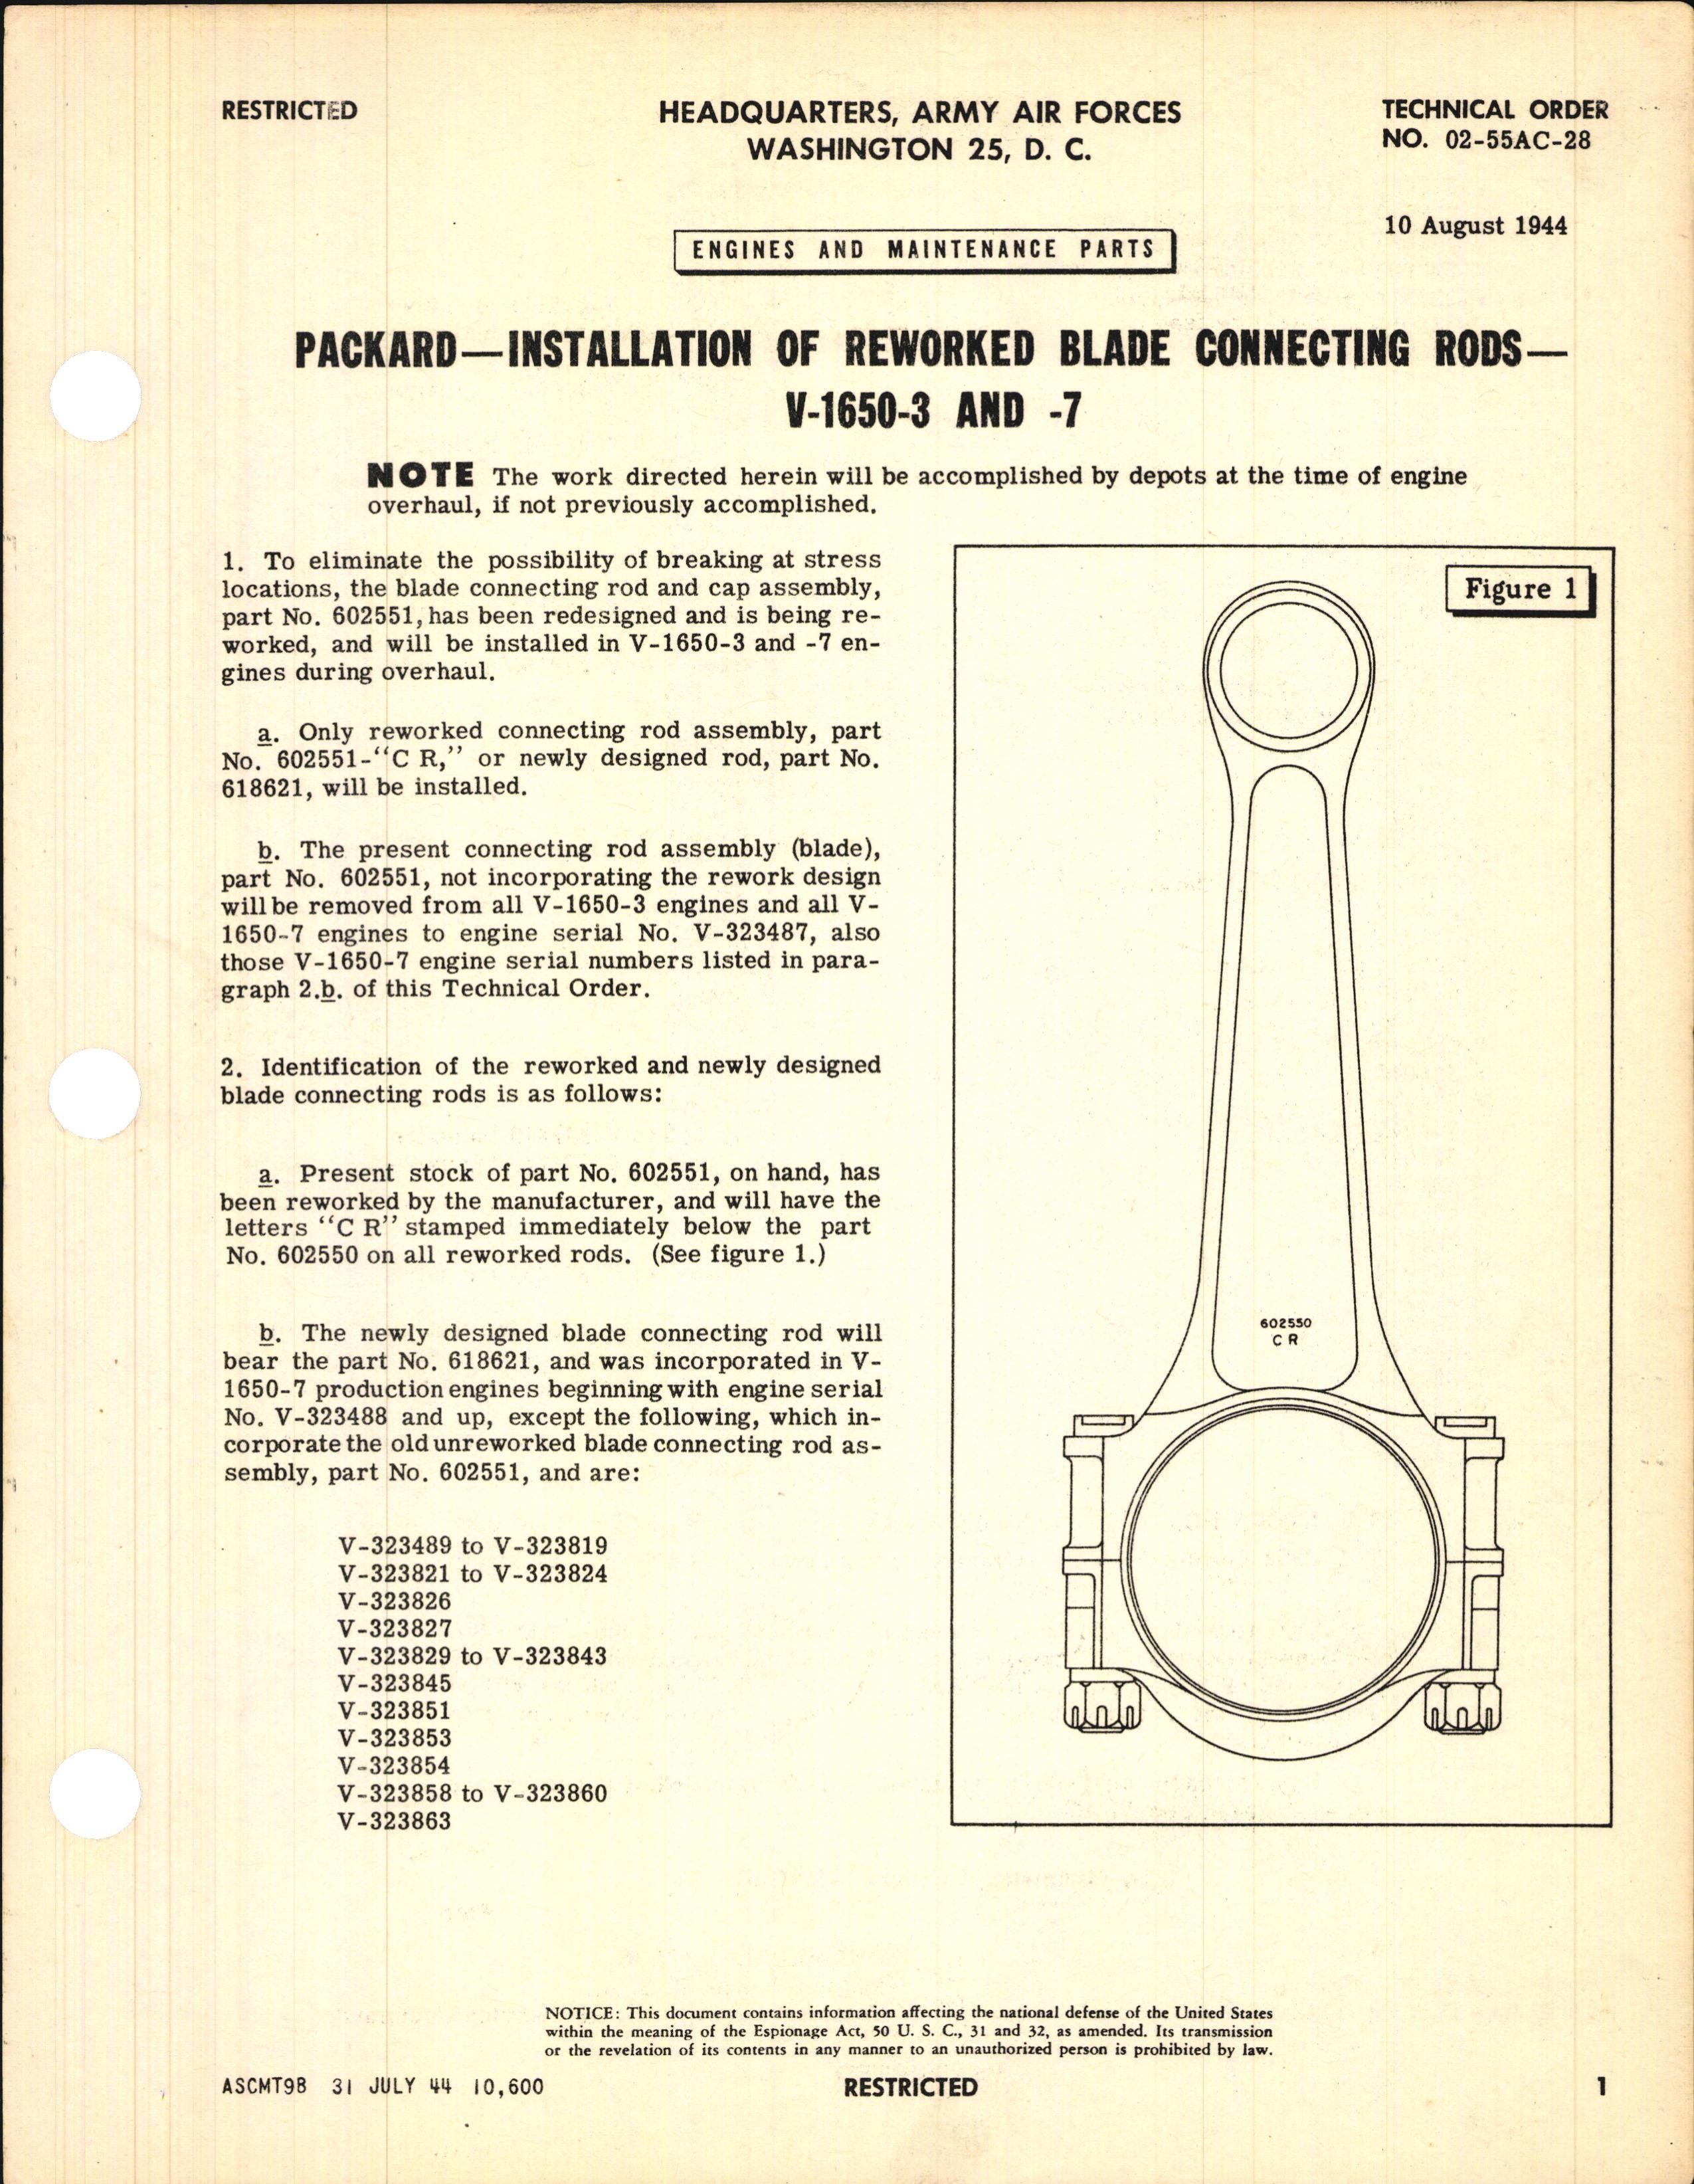 Sample page 1 from AirCorps Library document: Installation of Reworked Blade Connecting Rods for V-1650-3 and -7